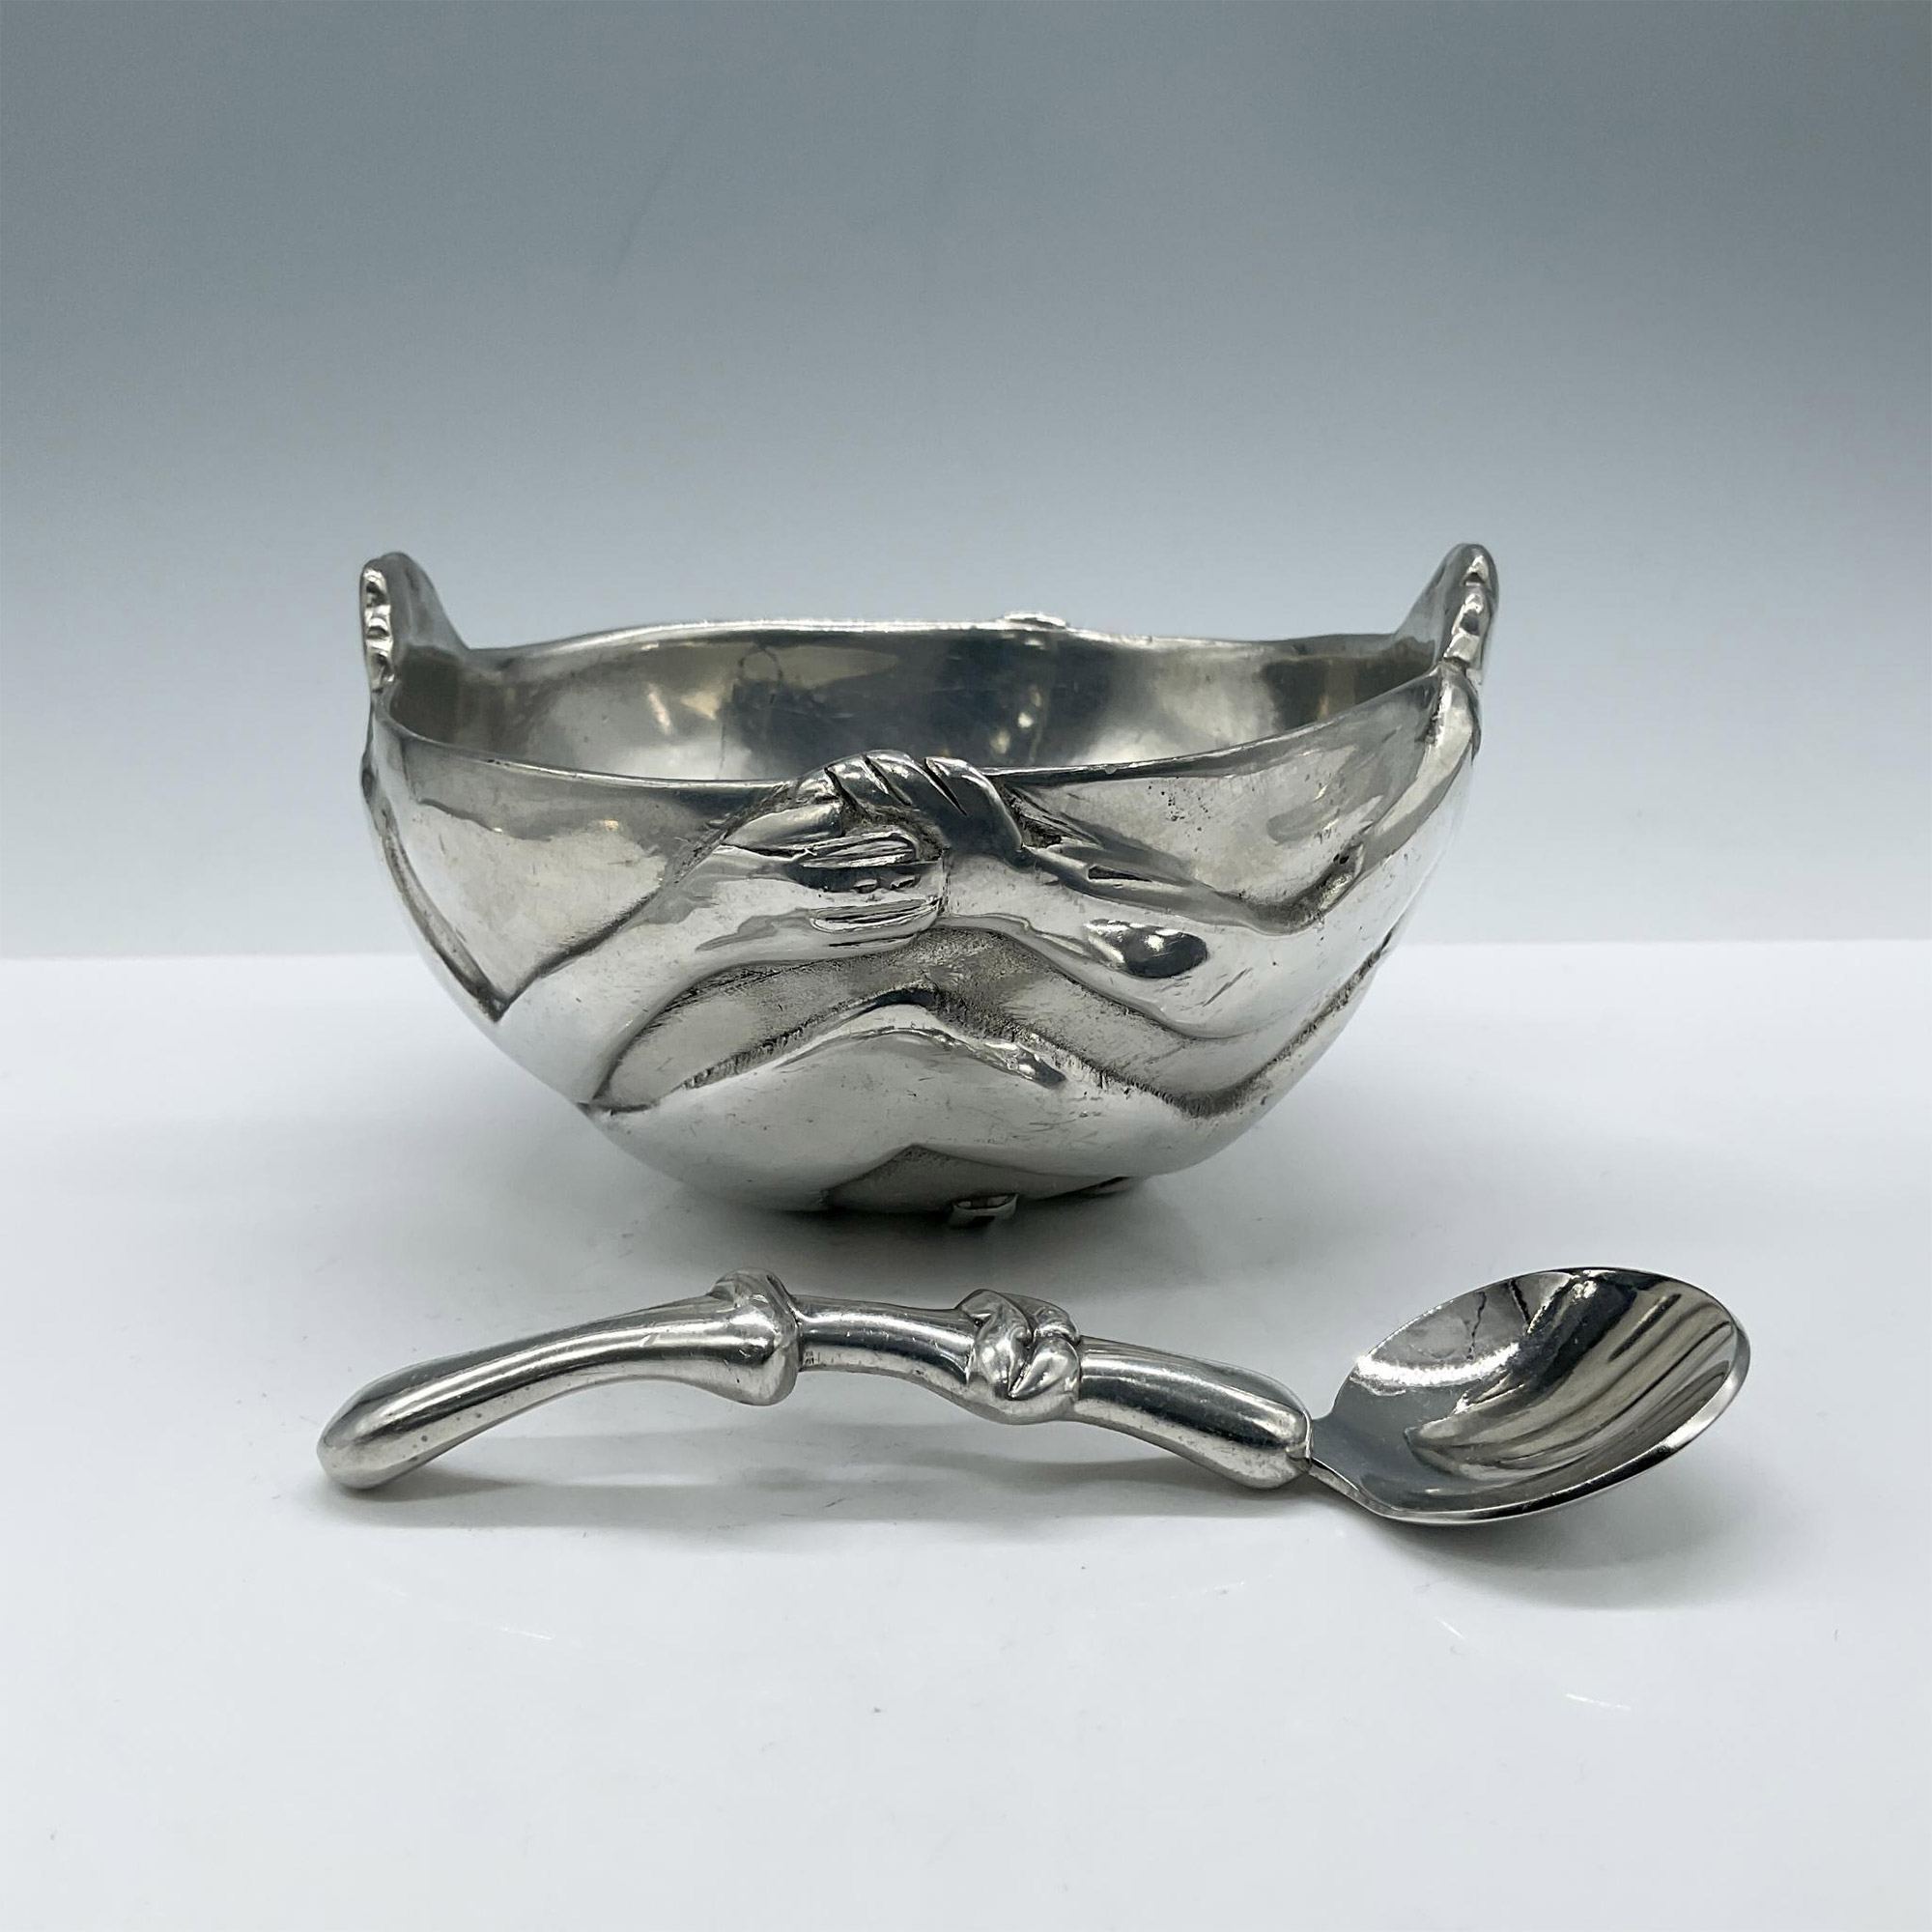 2pc Carrol Boyes Figural Pewter Bowl and Spoon - Image 4 of 5